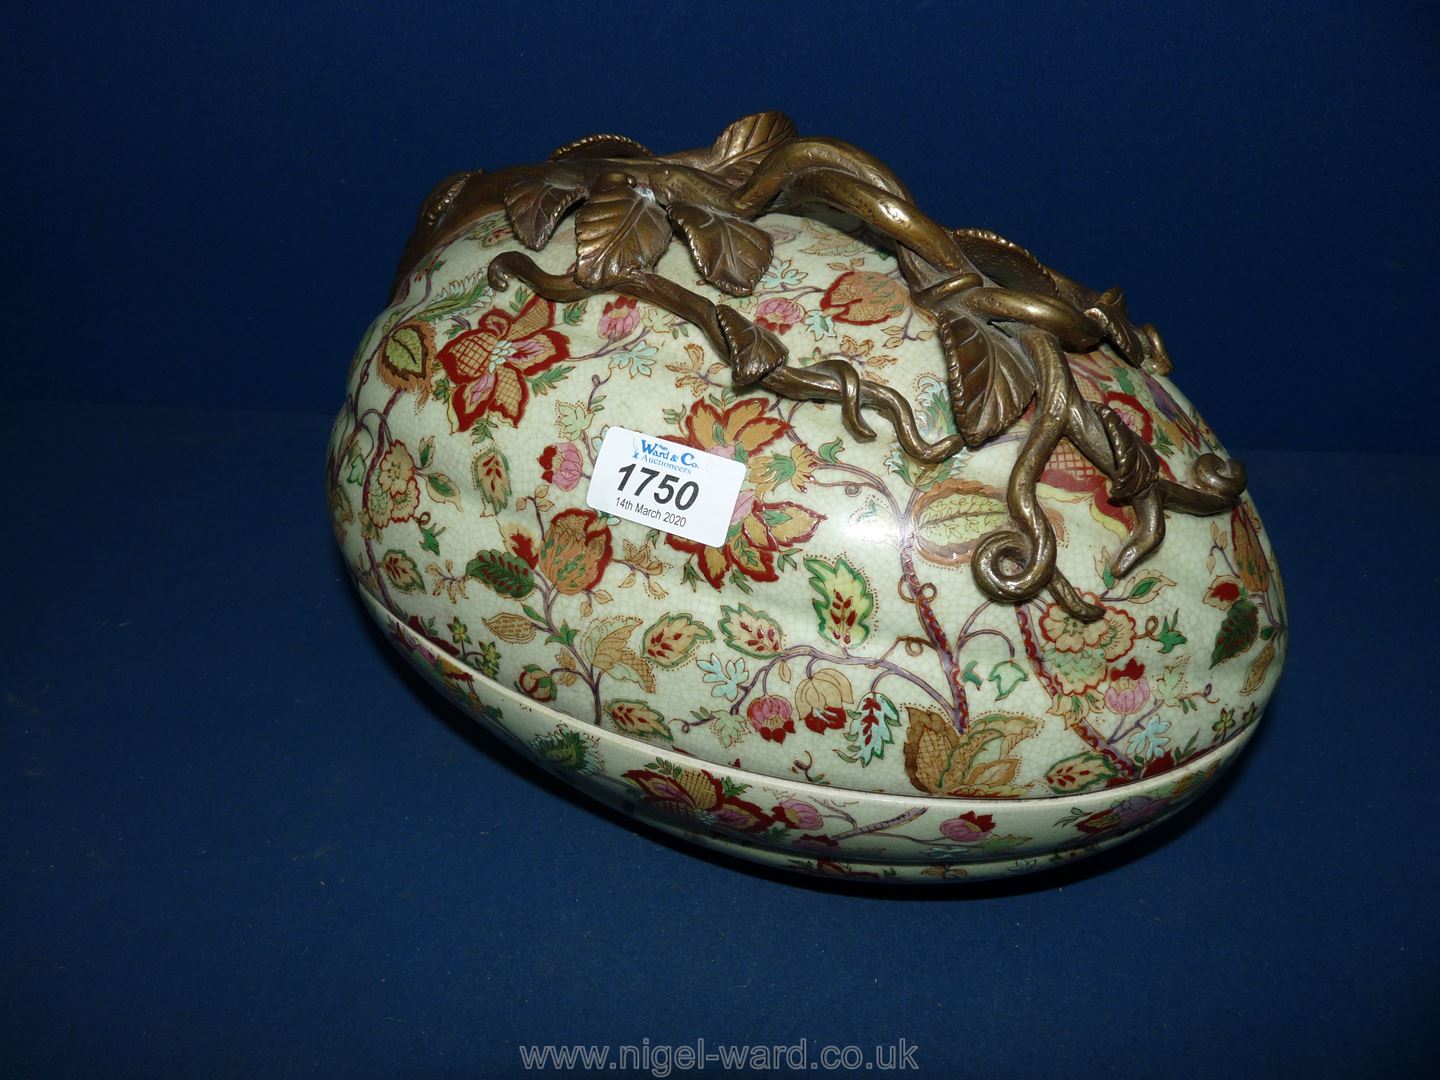 A large ornate hand painted floral egg shaped tureen with metal fret-work to handle.